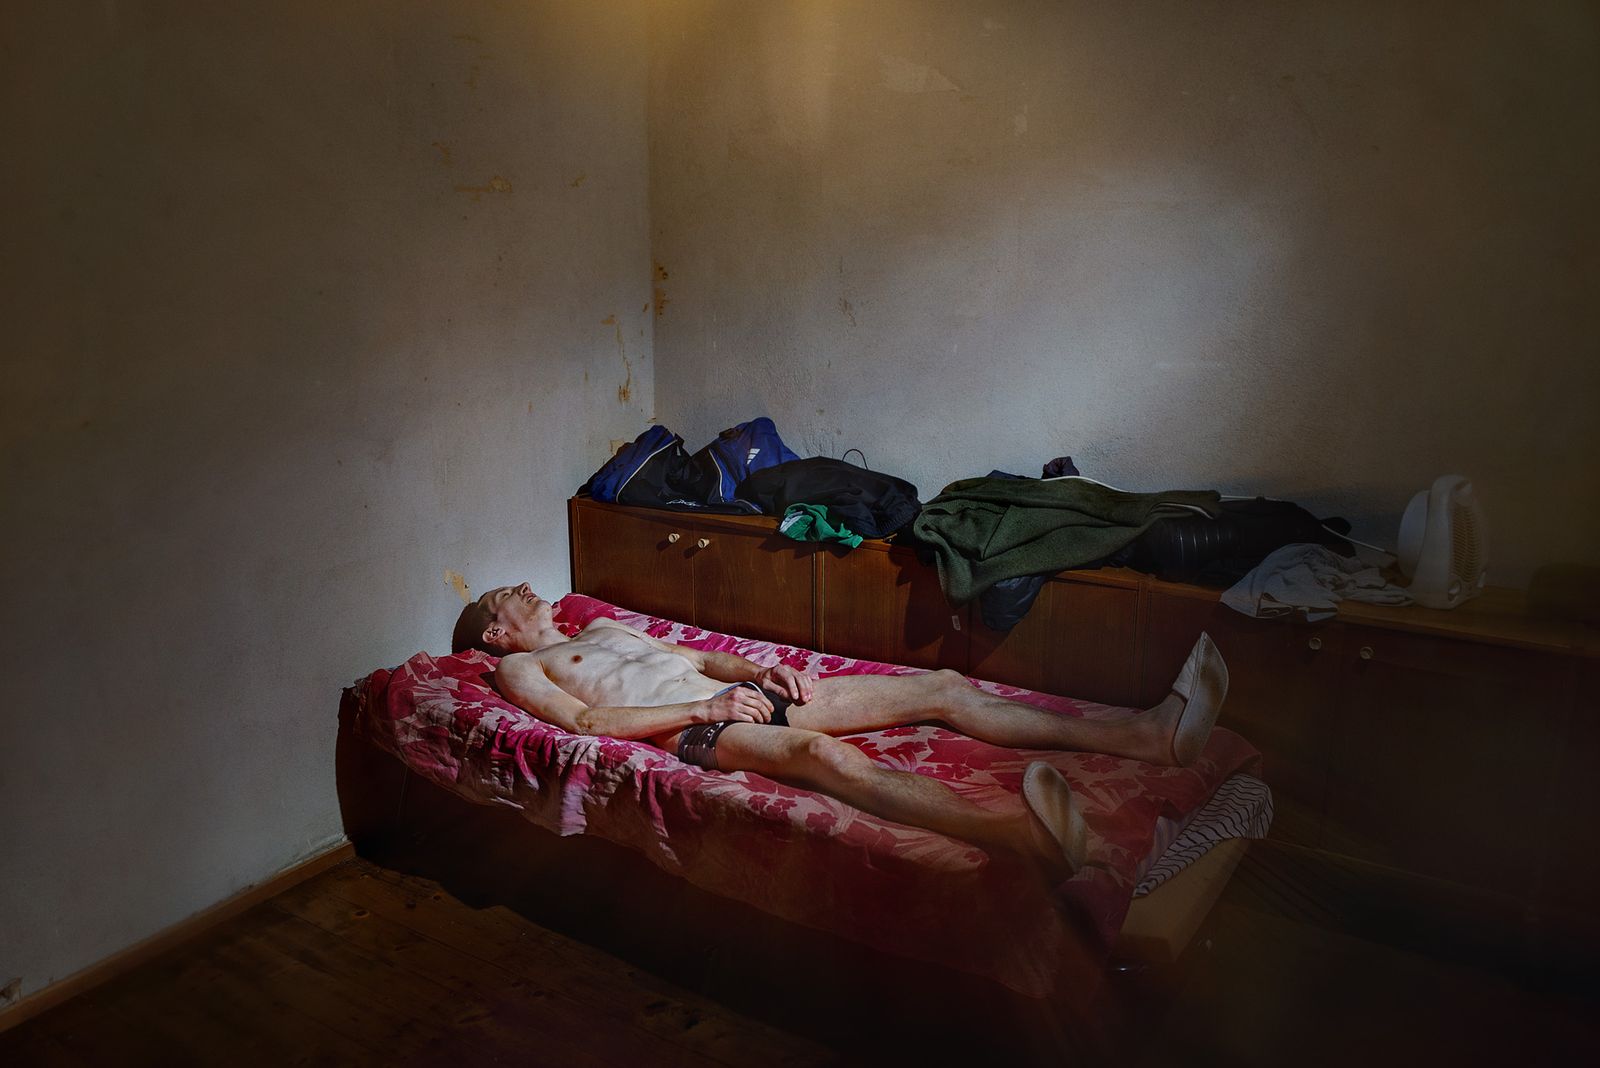 © Paolo Marchetti - Image from the Inner Whisper - The record of deaths from overdoses in Europe photography project